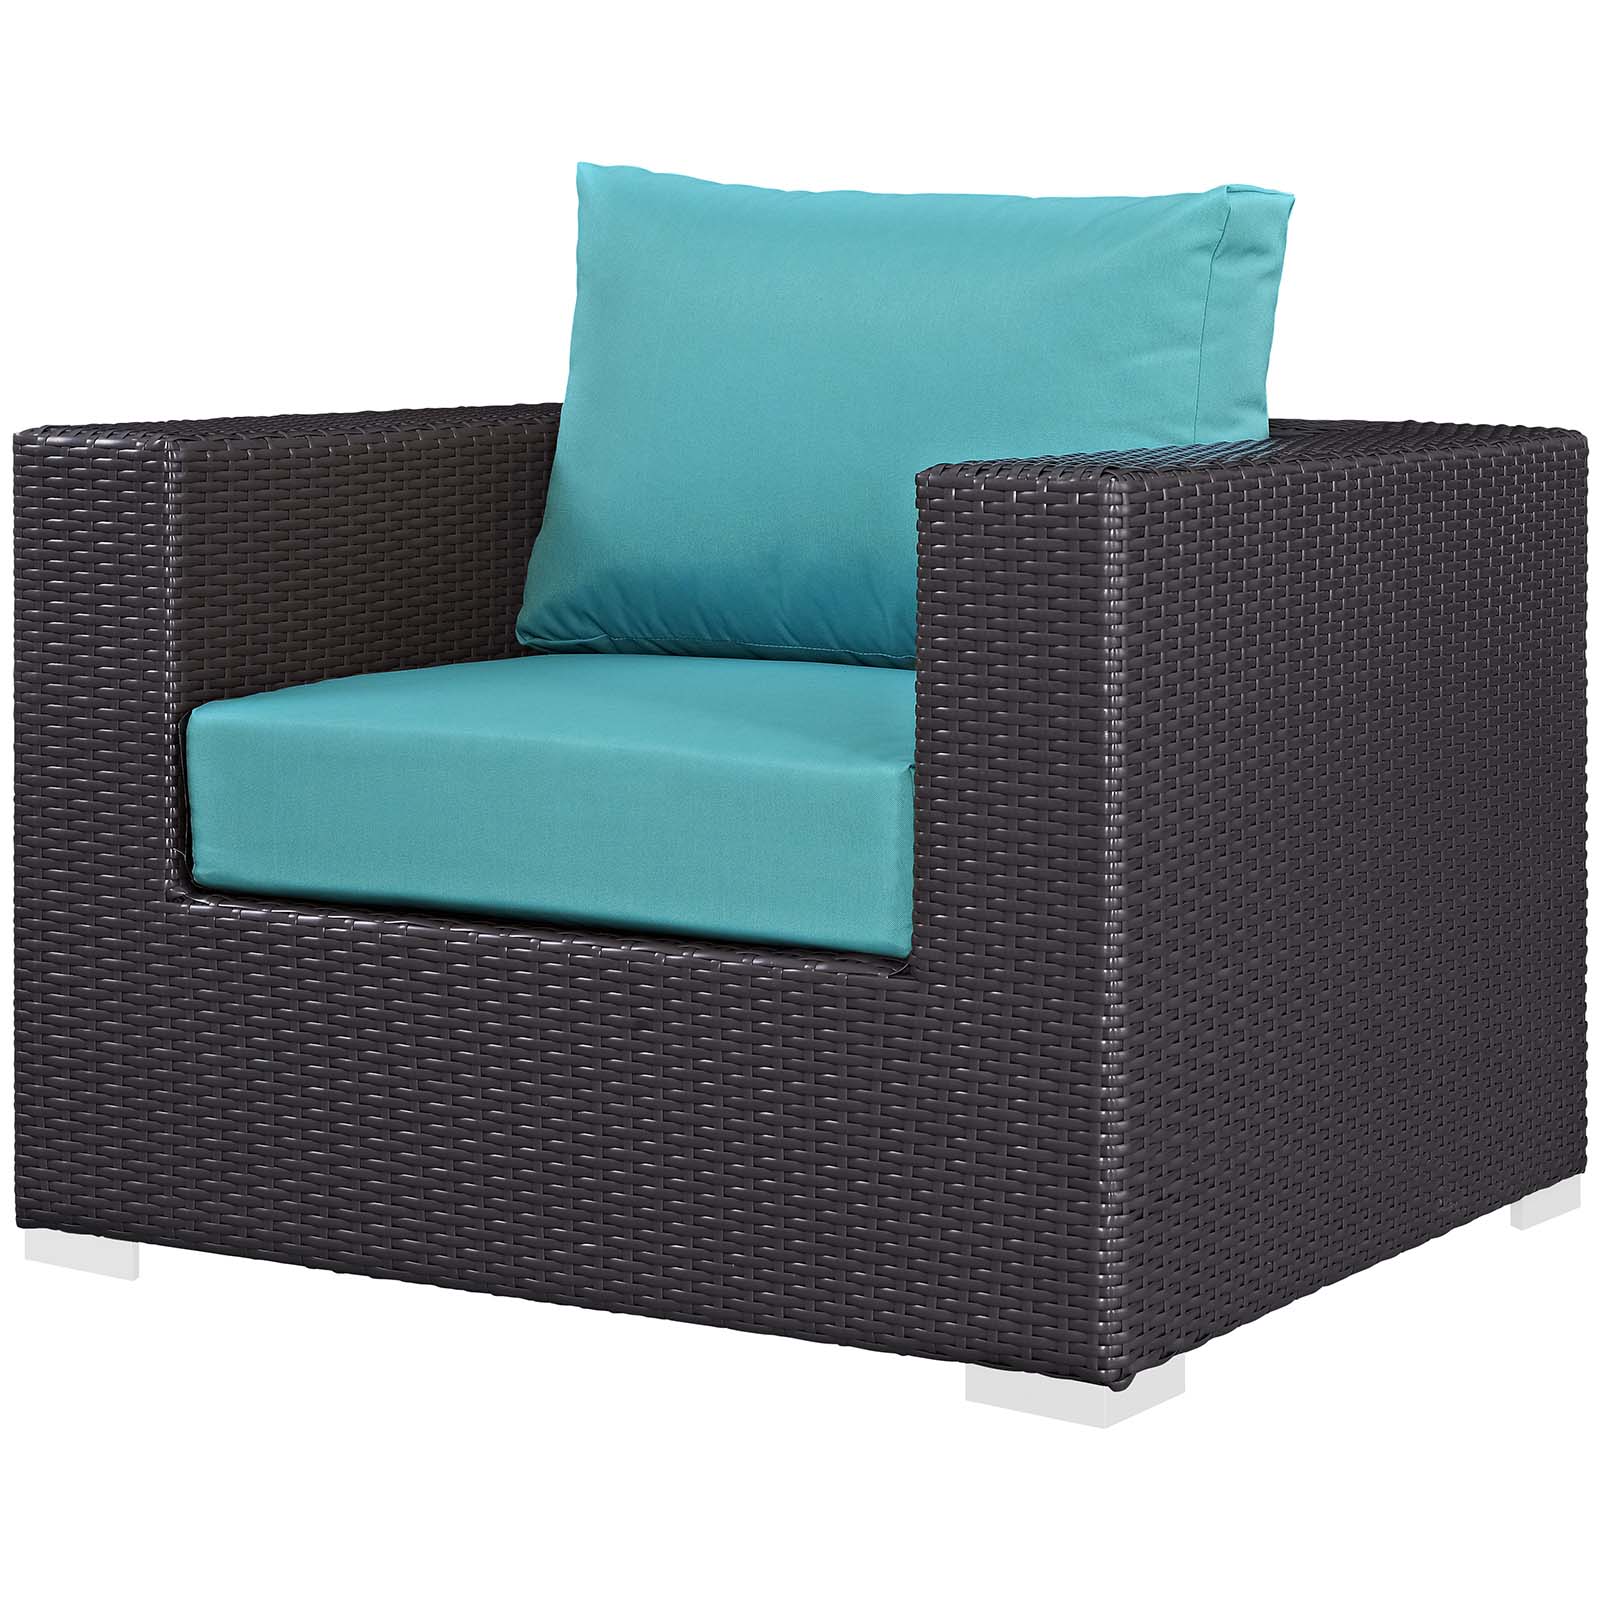 Contemporary Modern Urban Designer Outdoor Patio Balcony Garden Furniture Lounge Chair and Table Fire Pit Set, Fabric Rattan Wicker, Blue - image 5 of 8